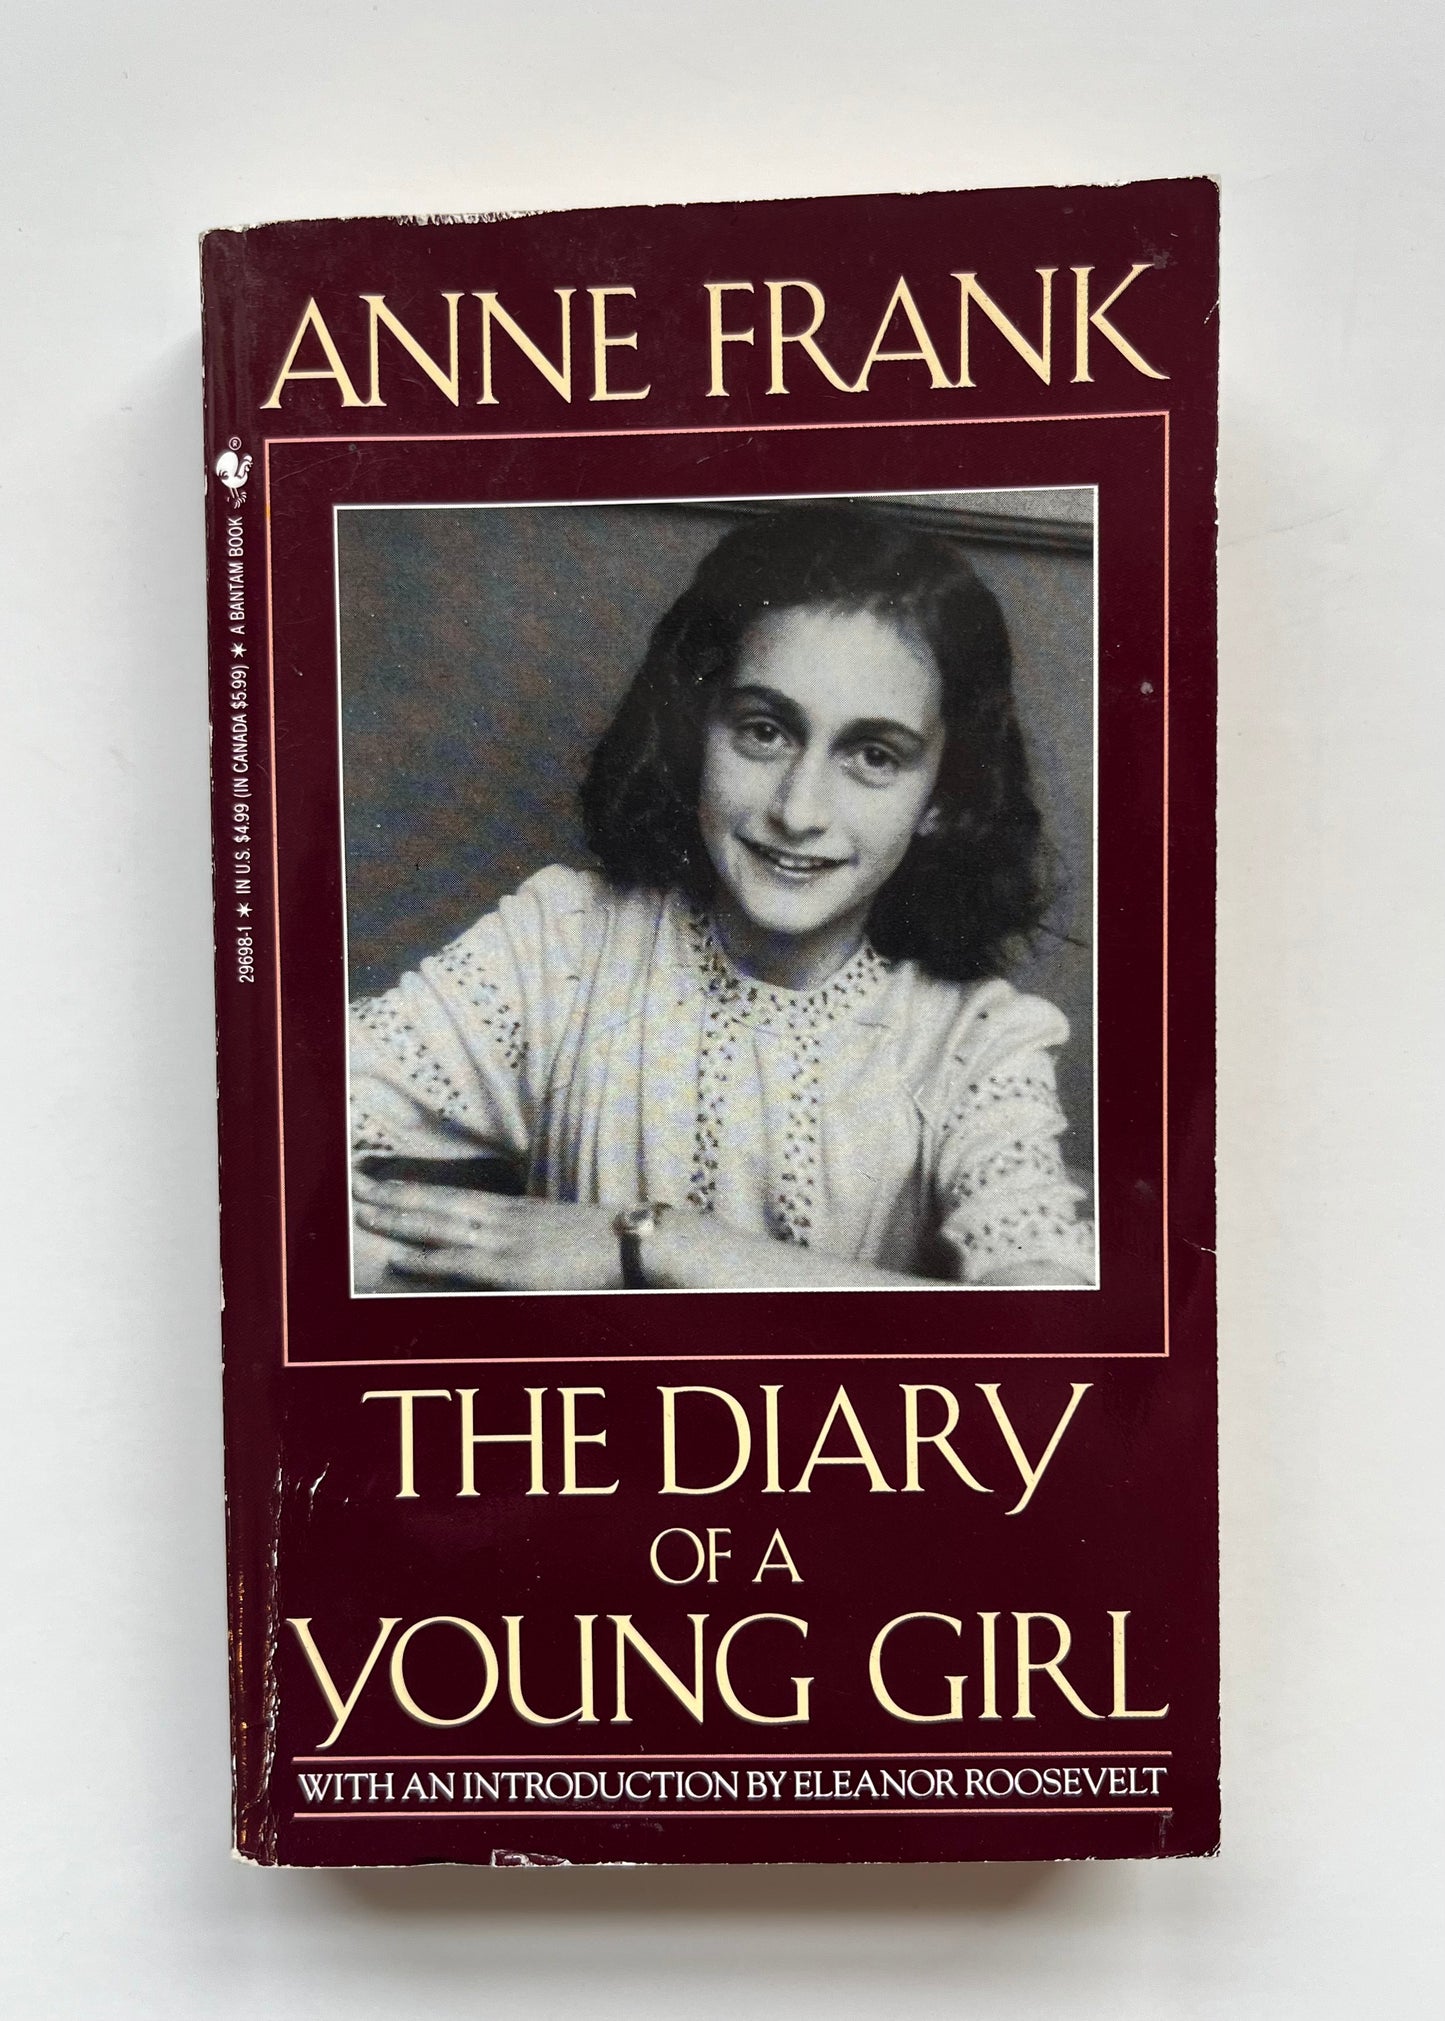 Anne Frank: The Diary of A Young Girl